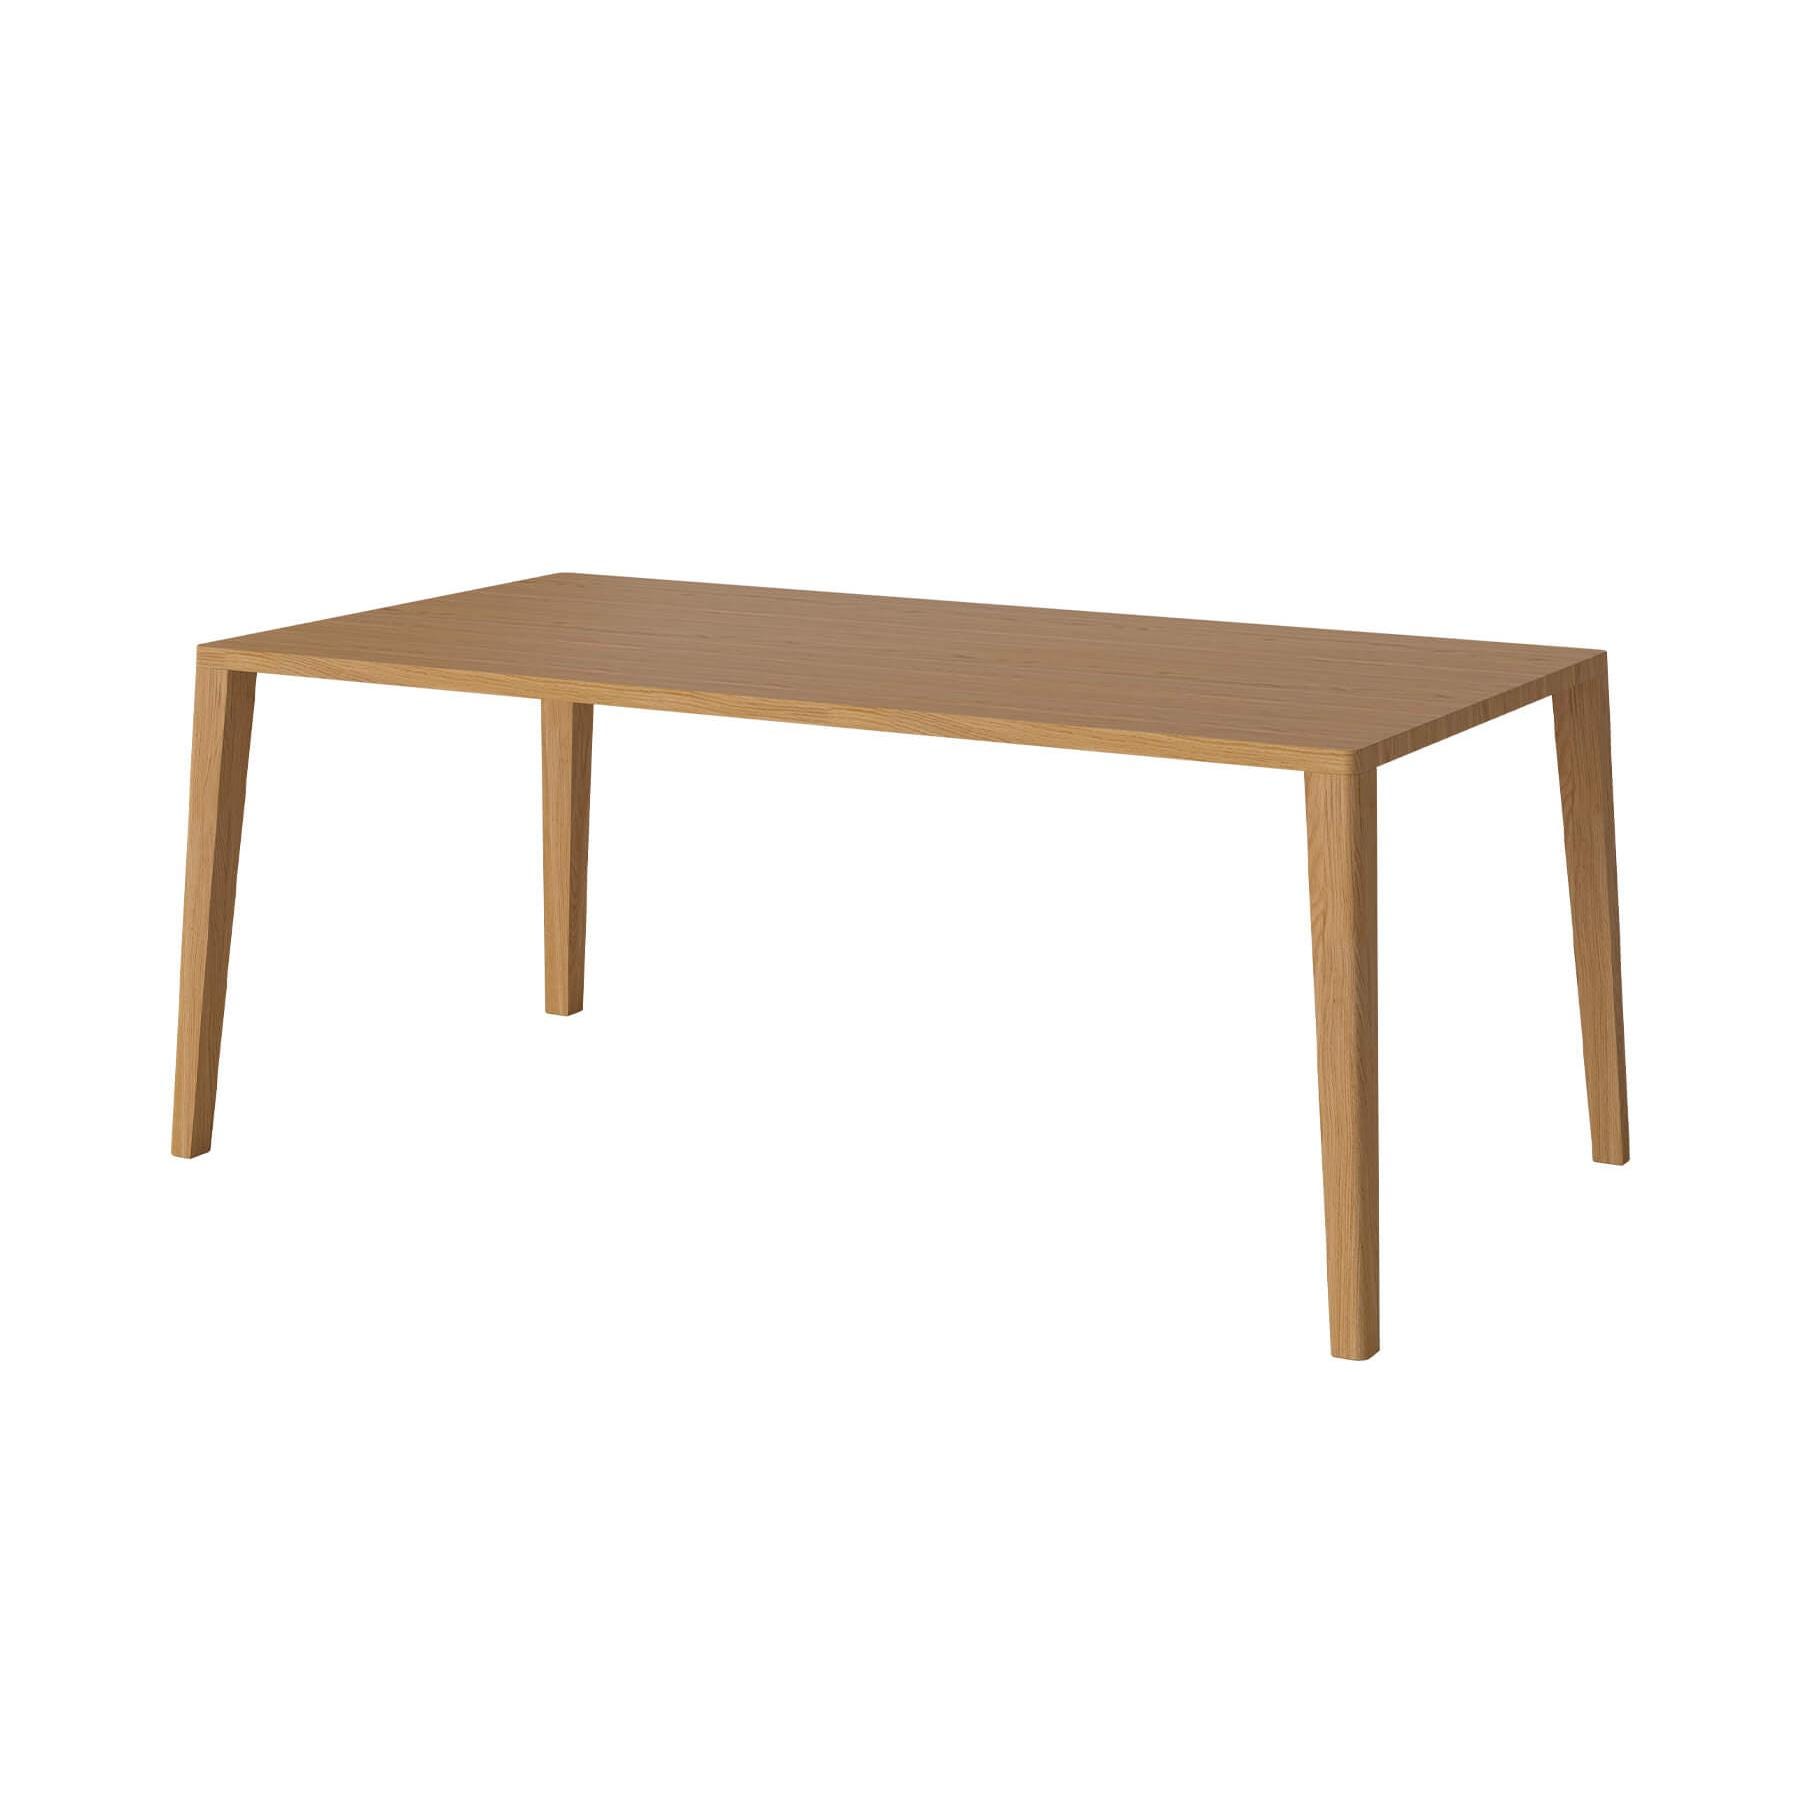 Bolia Graceful Dining Table 180 X 95cm Oiled Legs With Extension Leaves Light Wood Designer Furniture From Holloways Of Ludlow